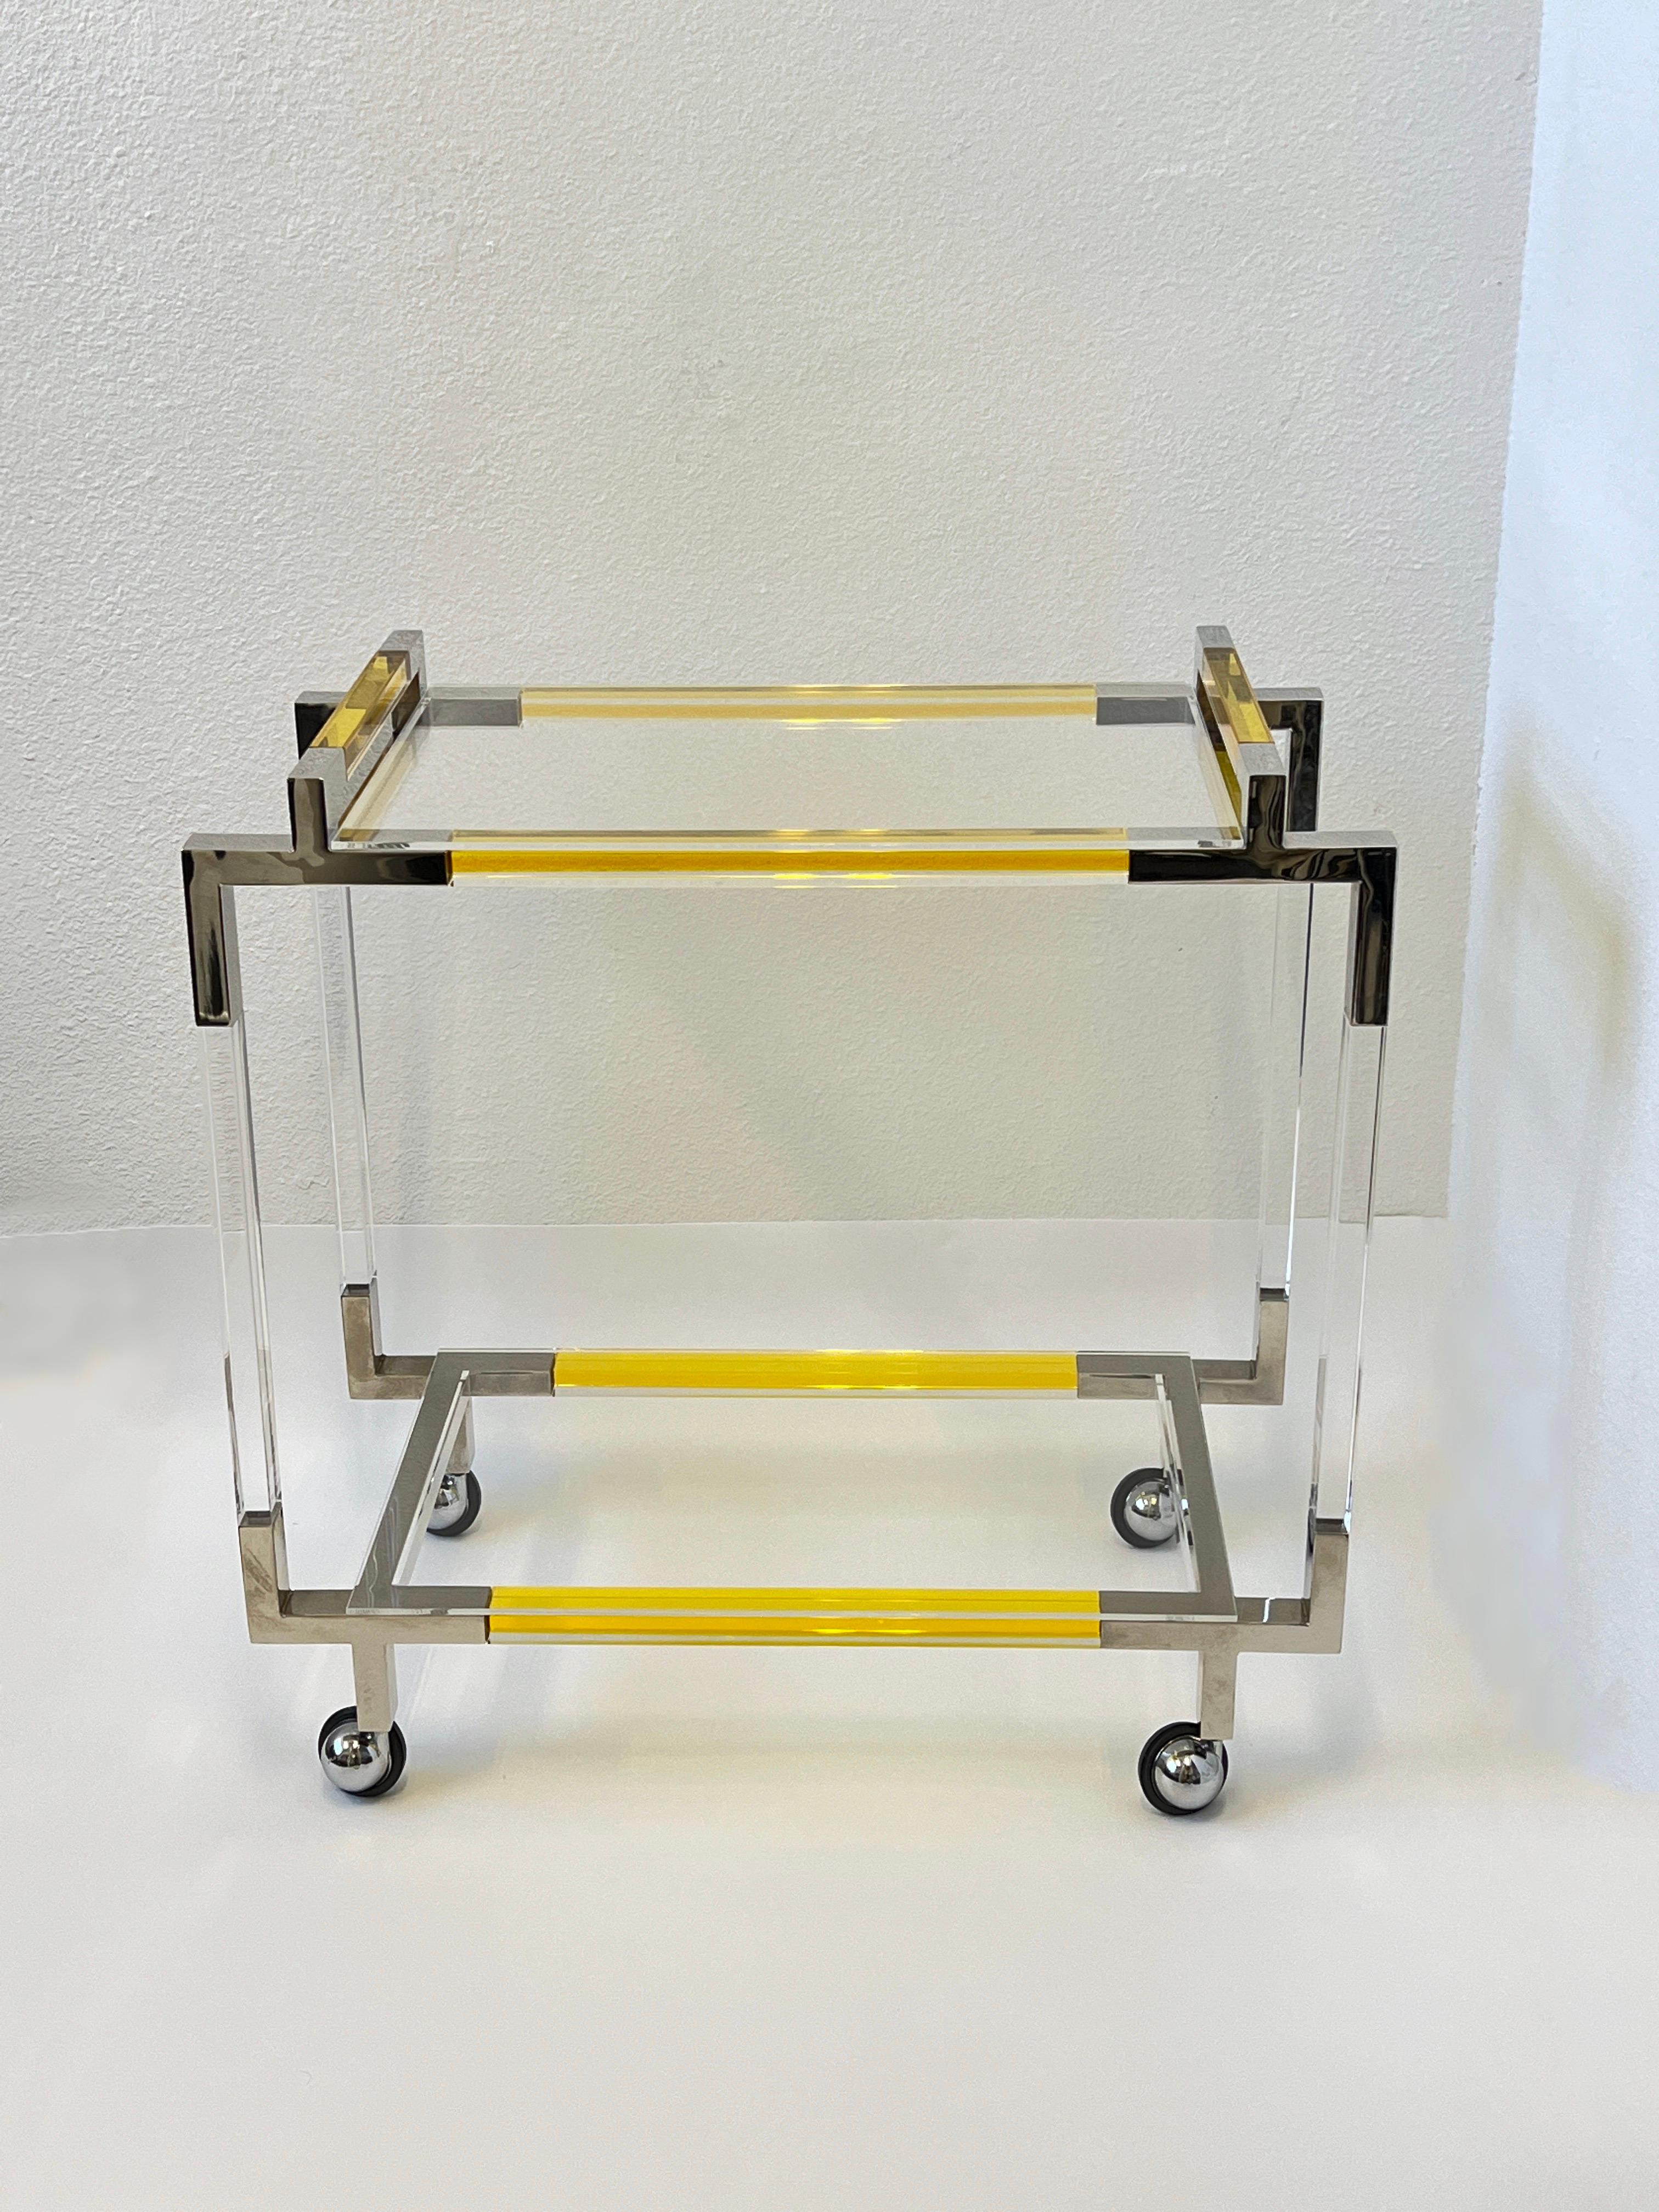 Polish chrome and lucite two tier bar cart by American renowned designer Charles Hollis Jones. 
Part of his new limited edition work, Seeing in color. 
Measurements: 17” Deep, 32” Wide, 31.75” High.